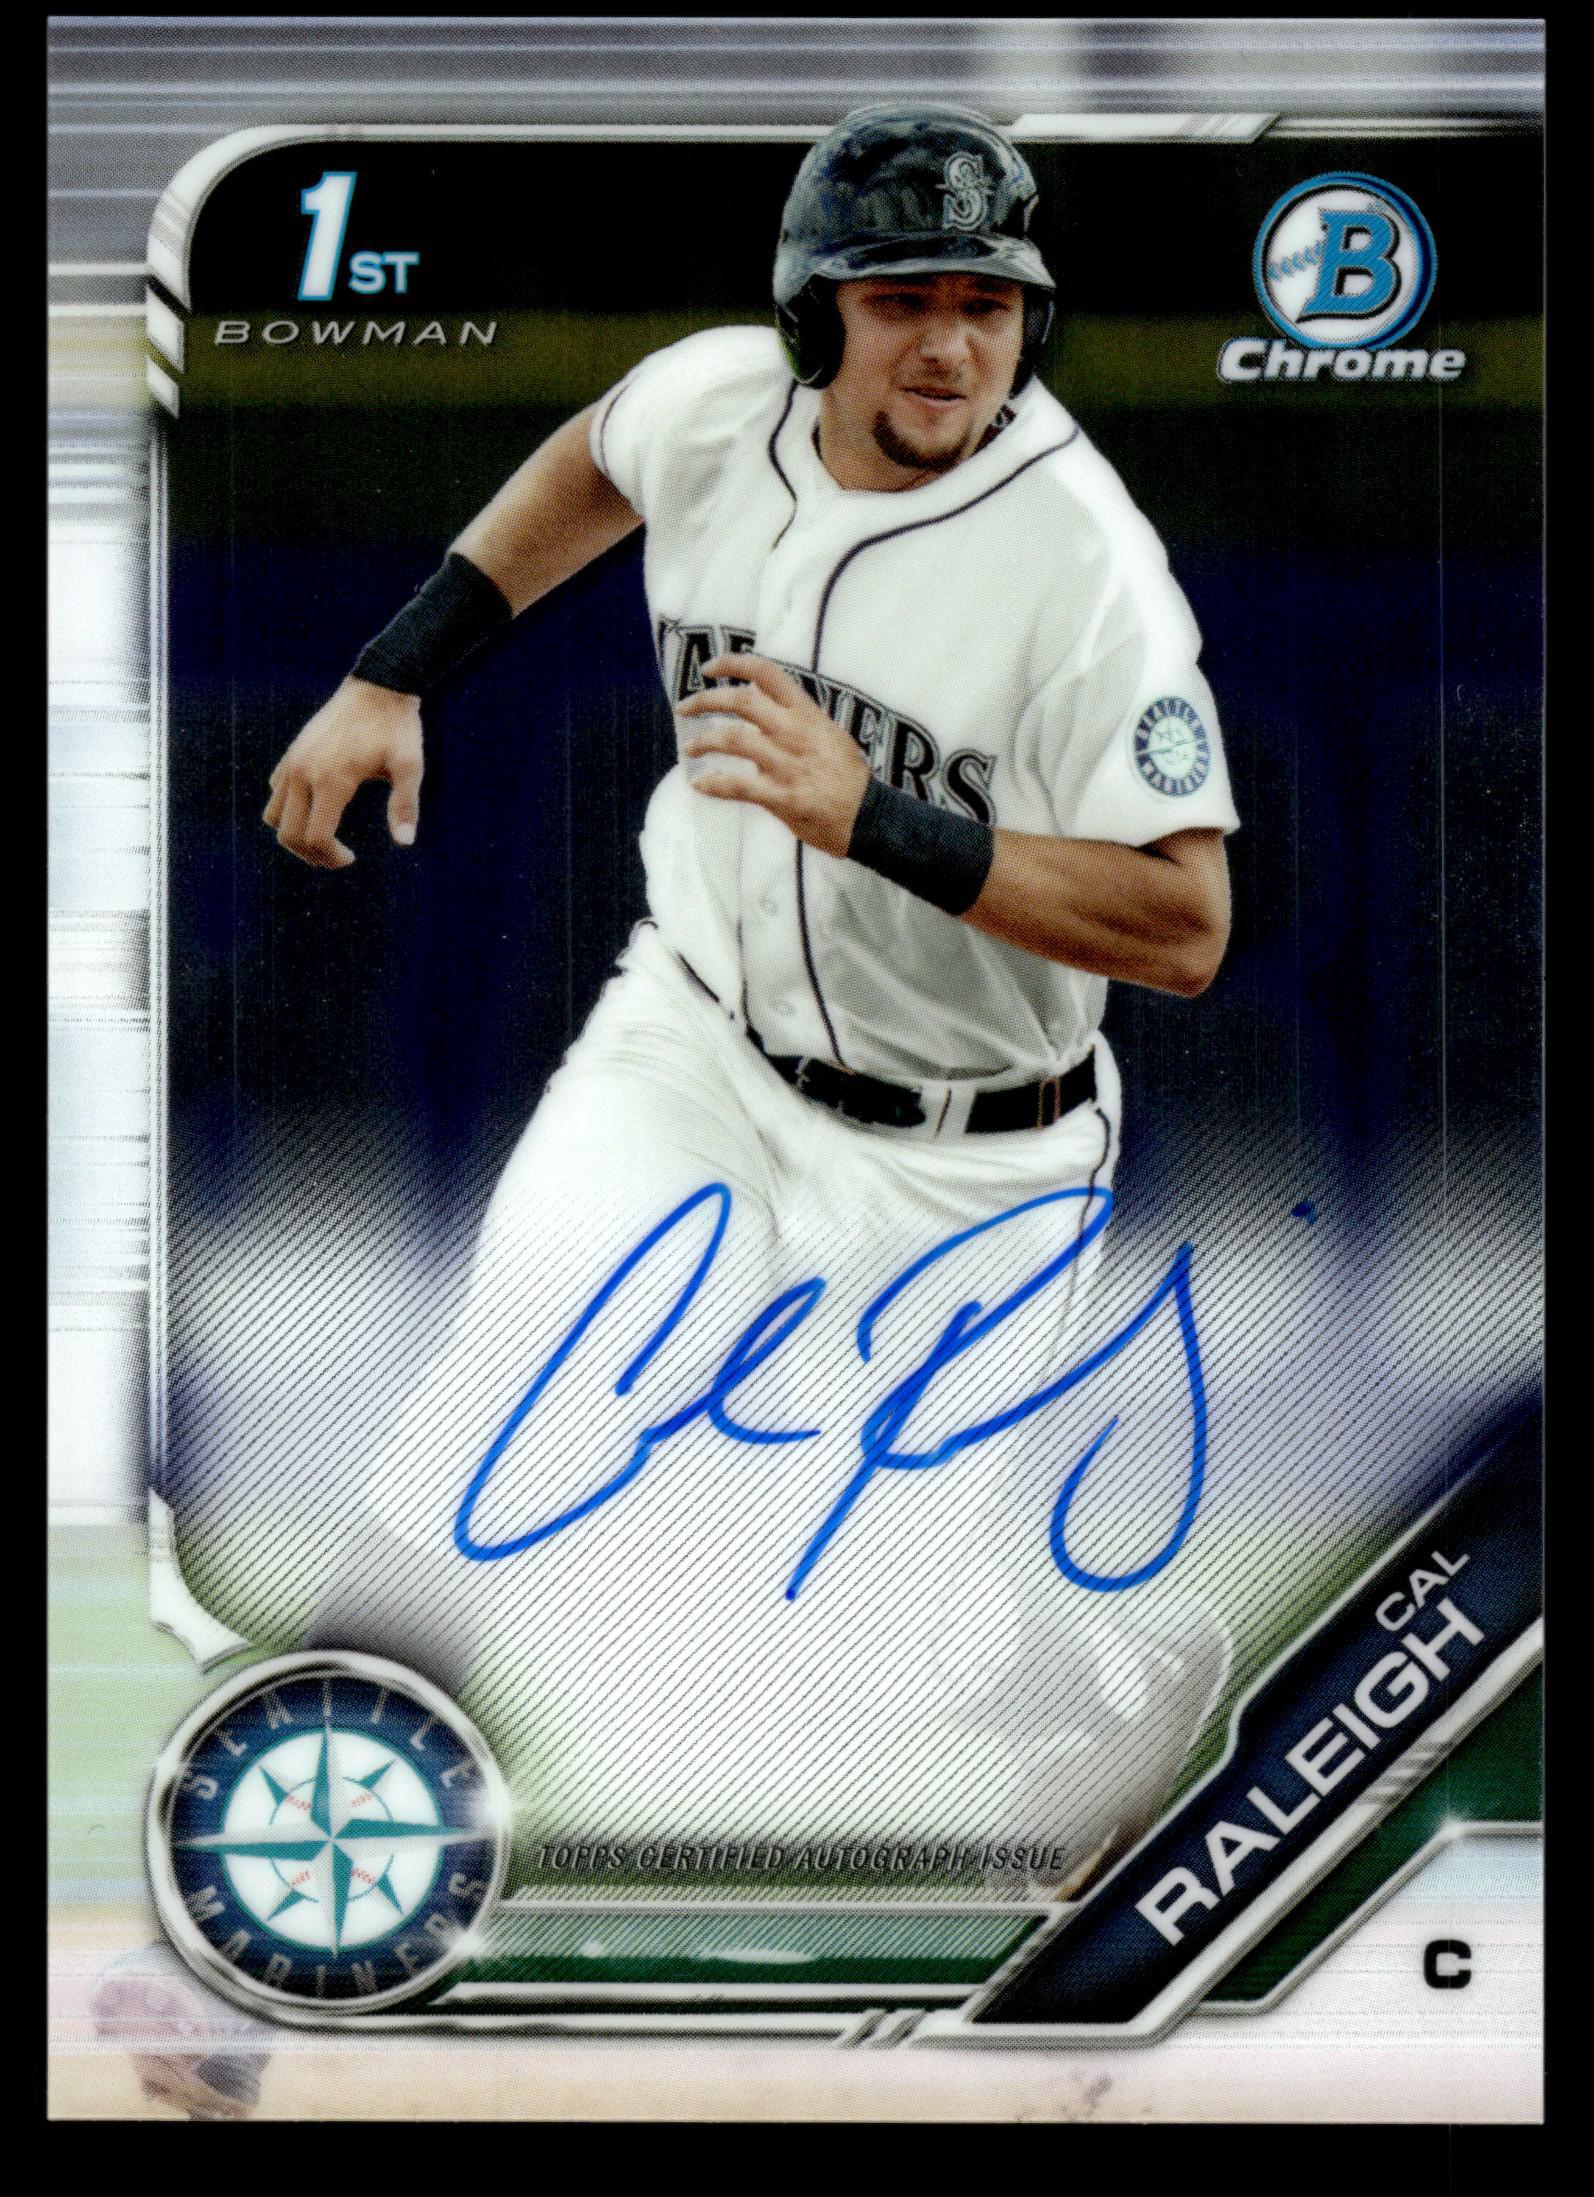 2023 TOPPS GOLD /2023 CAL RALEIGH “Big Dumper” Seattle Mariners!